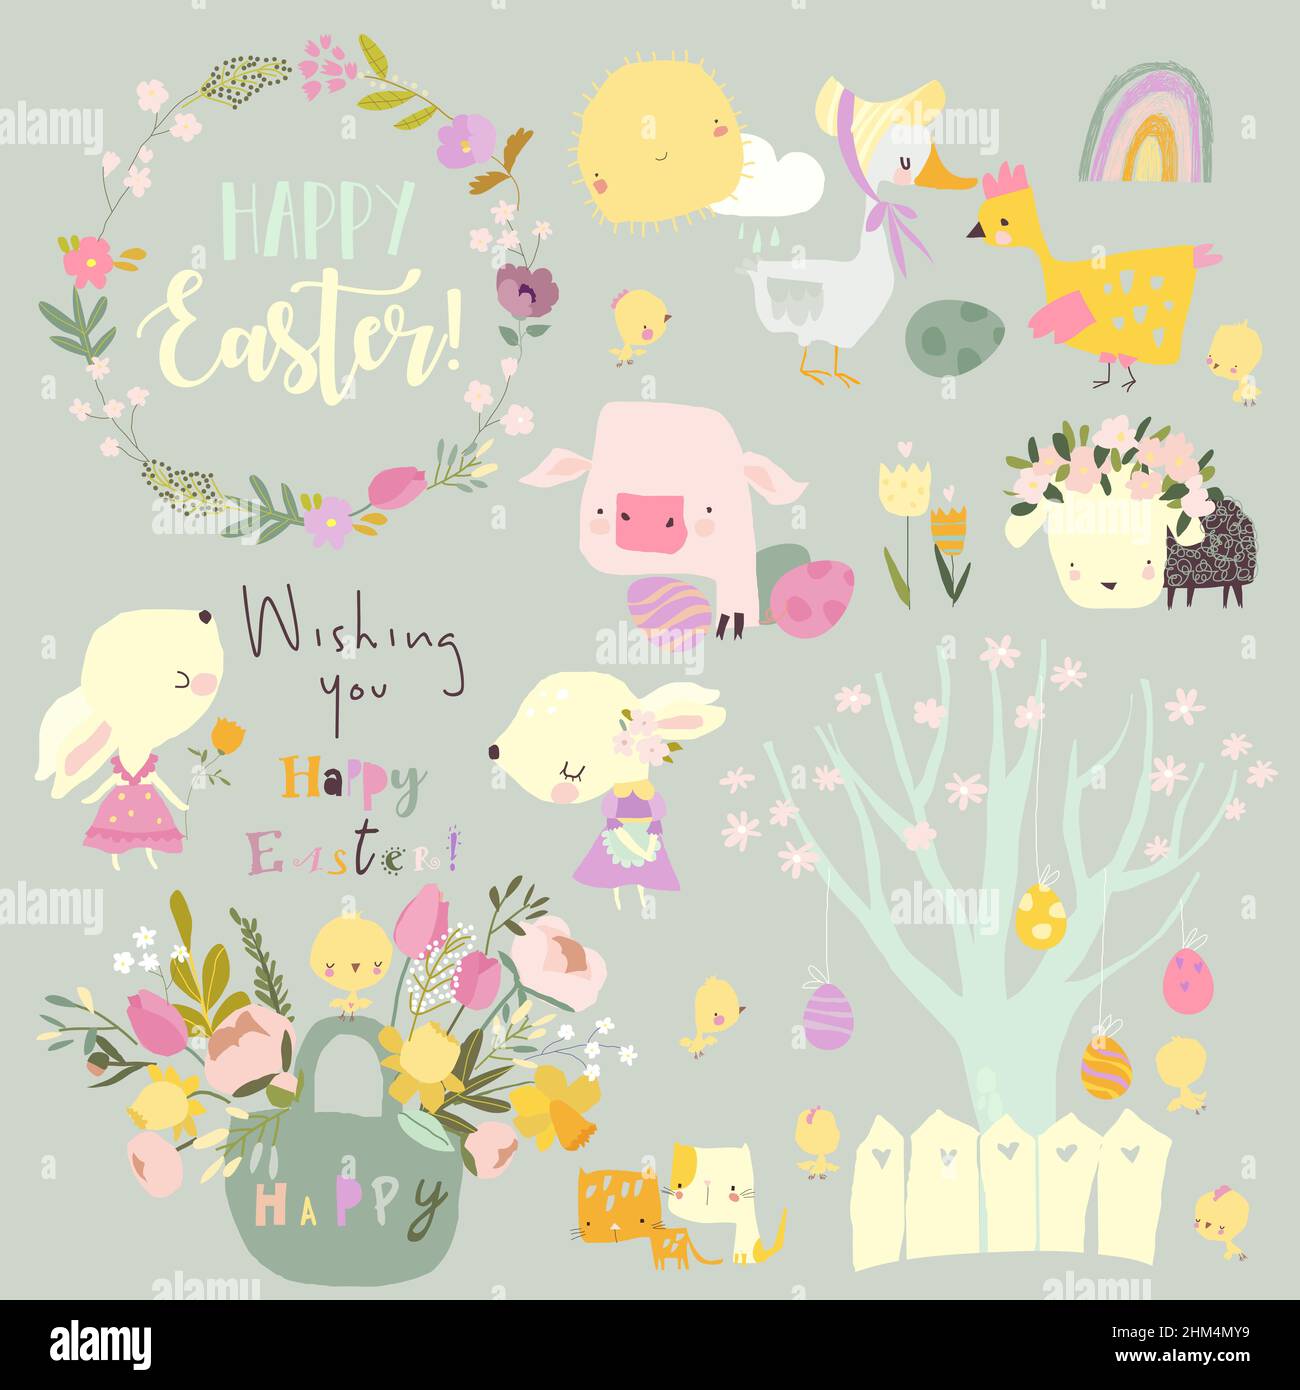 Cartoon Easter Set with Rabbits, Farm Animals and Flowers Stock Vector